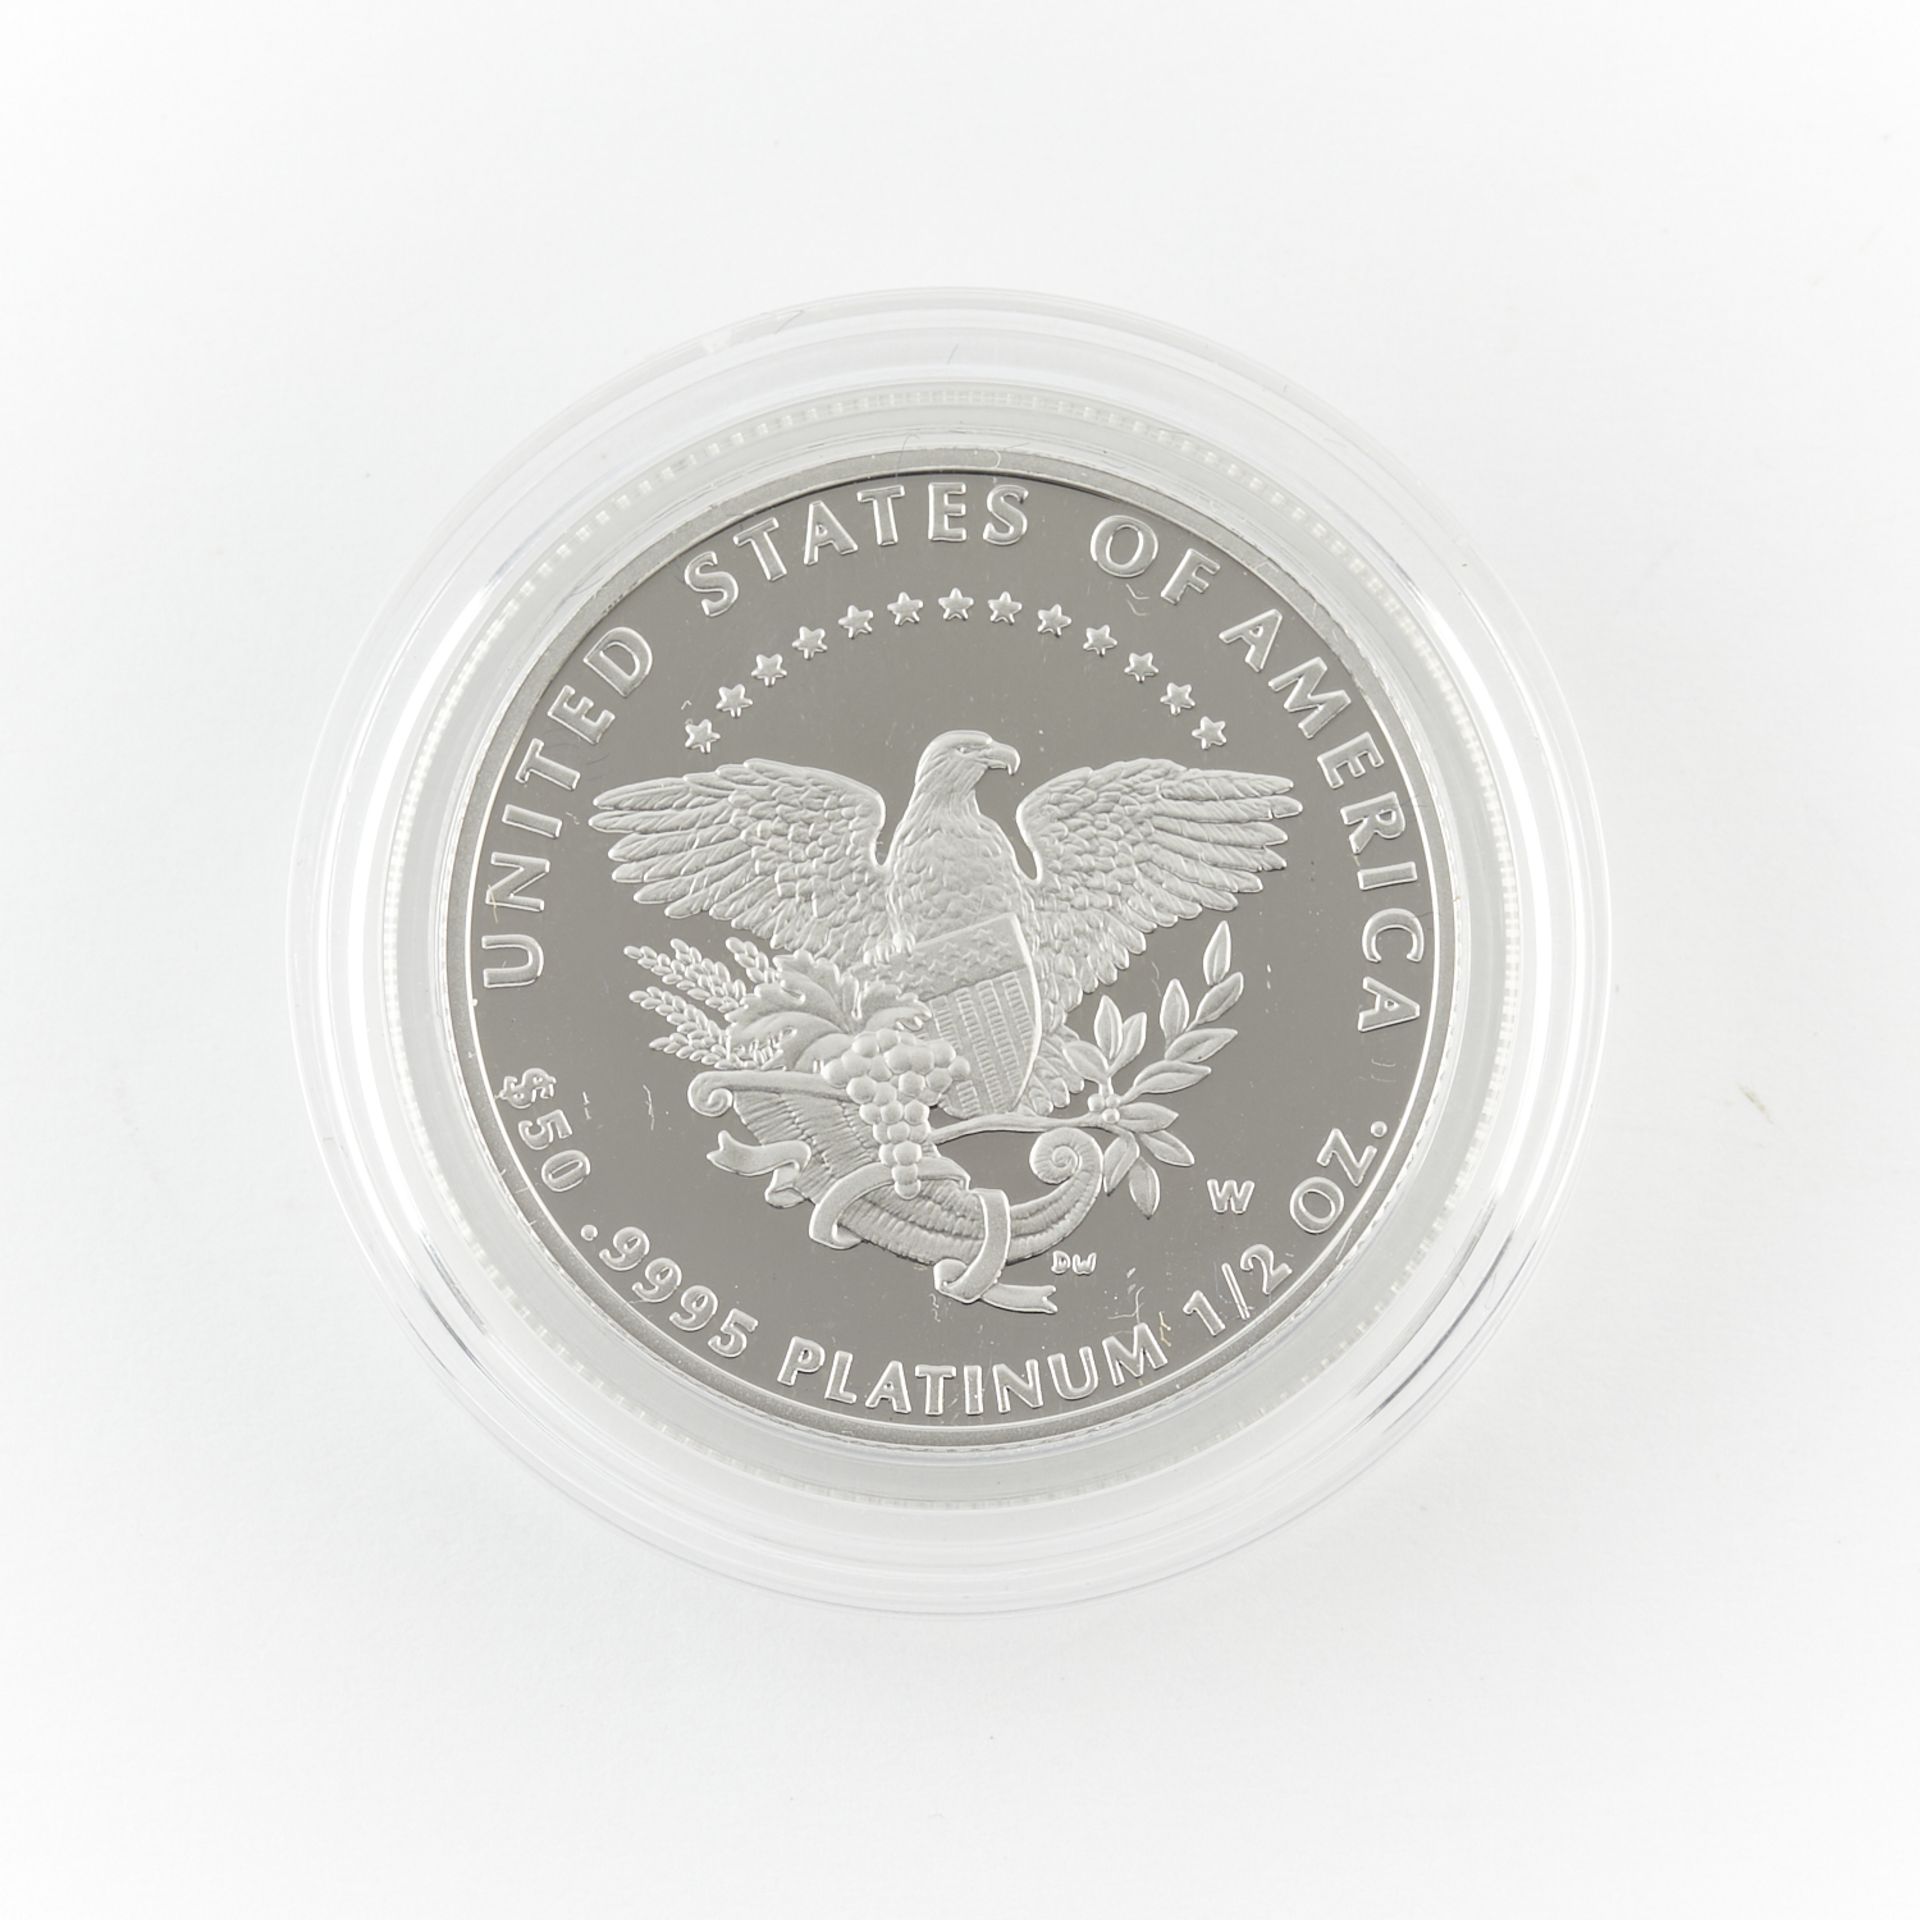 2005 $50 Platinum Statue of Liberty Proof Coin - Image 2 of 3